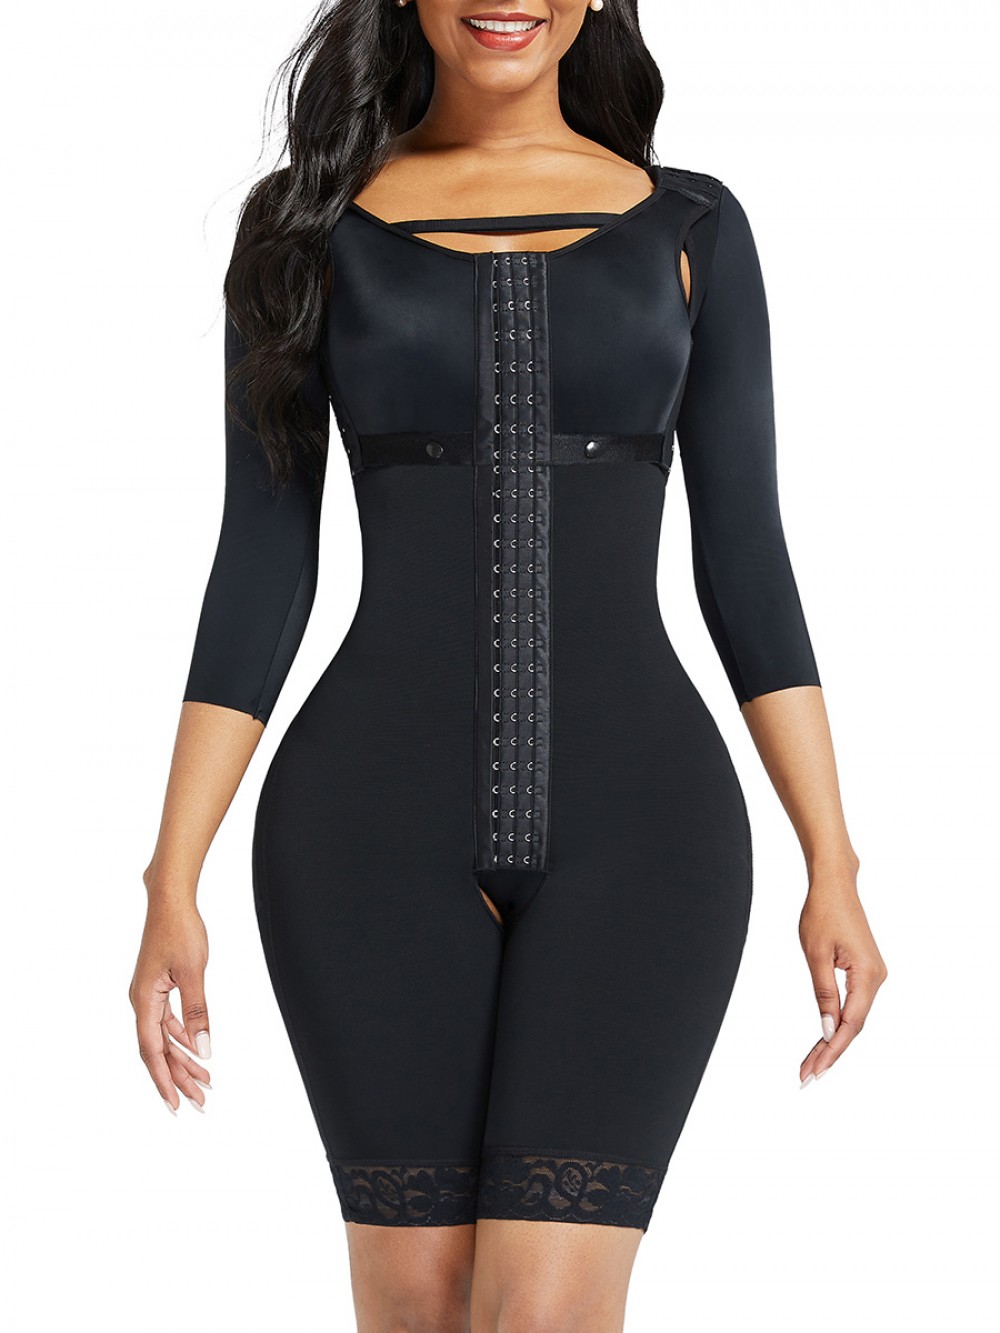 Black Lace Trim Hourglass Body Shaper With Sleeves Flatten Tummy